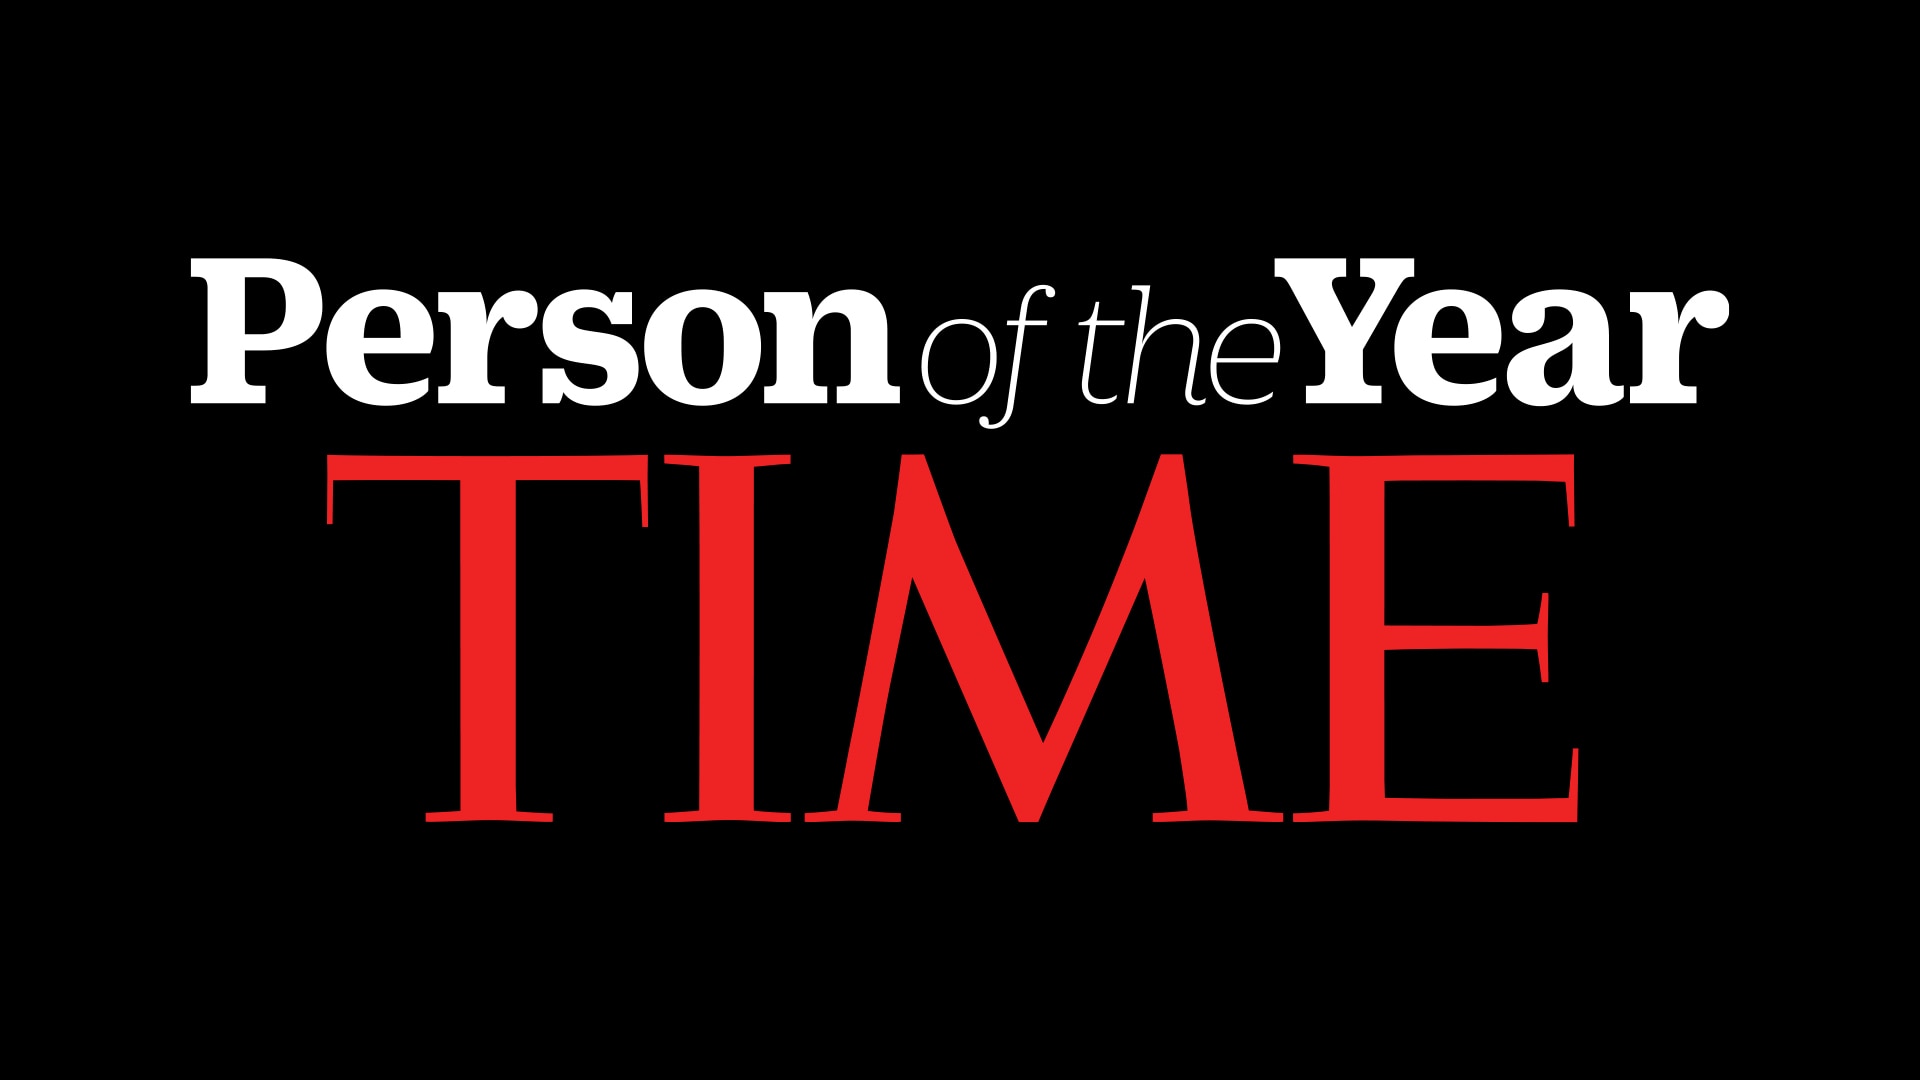 This week's TV: Time to catch up on TV, the 'Person of the Year